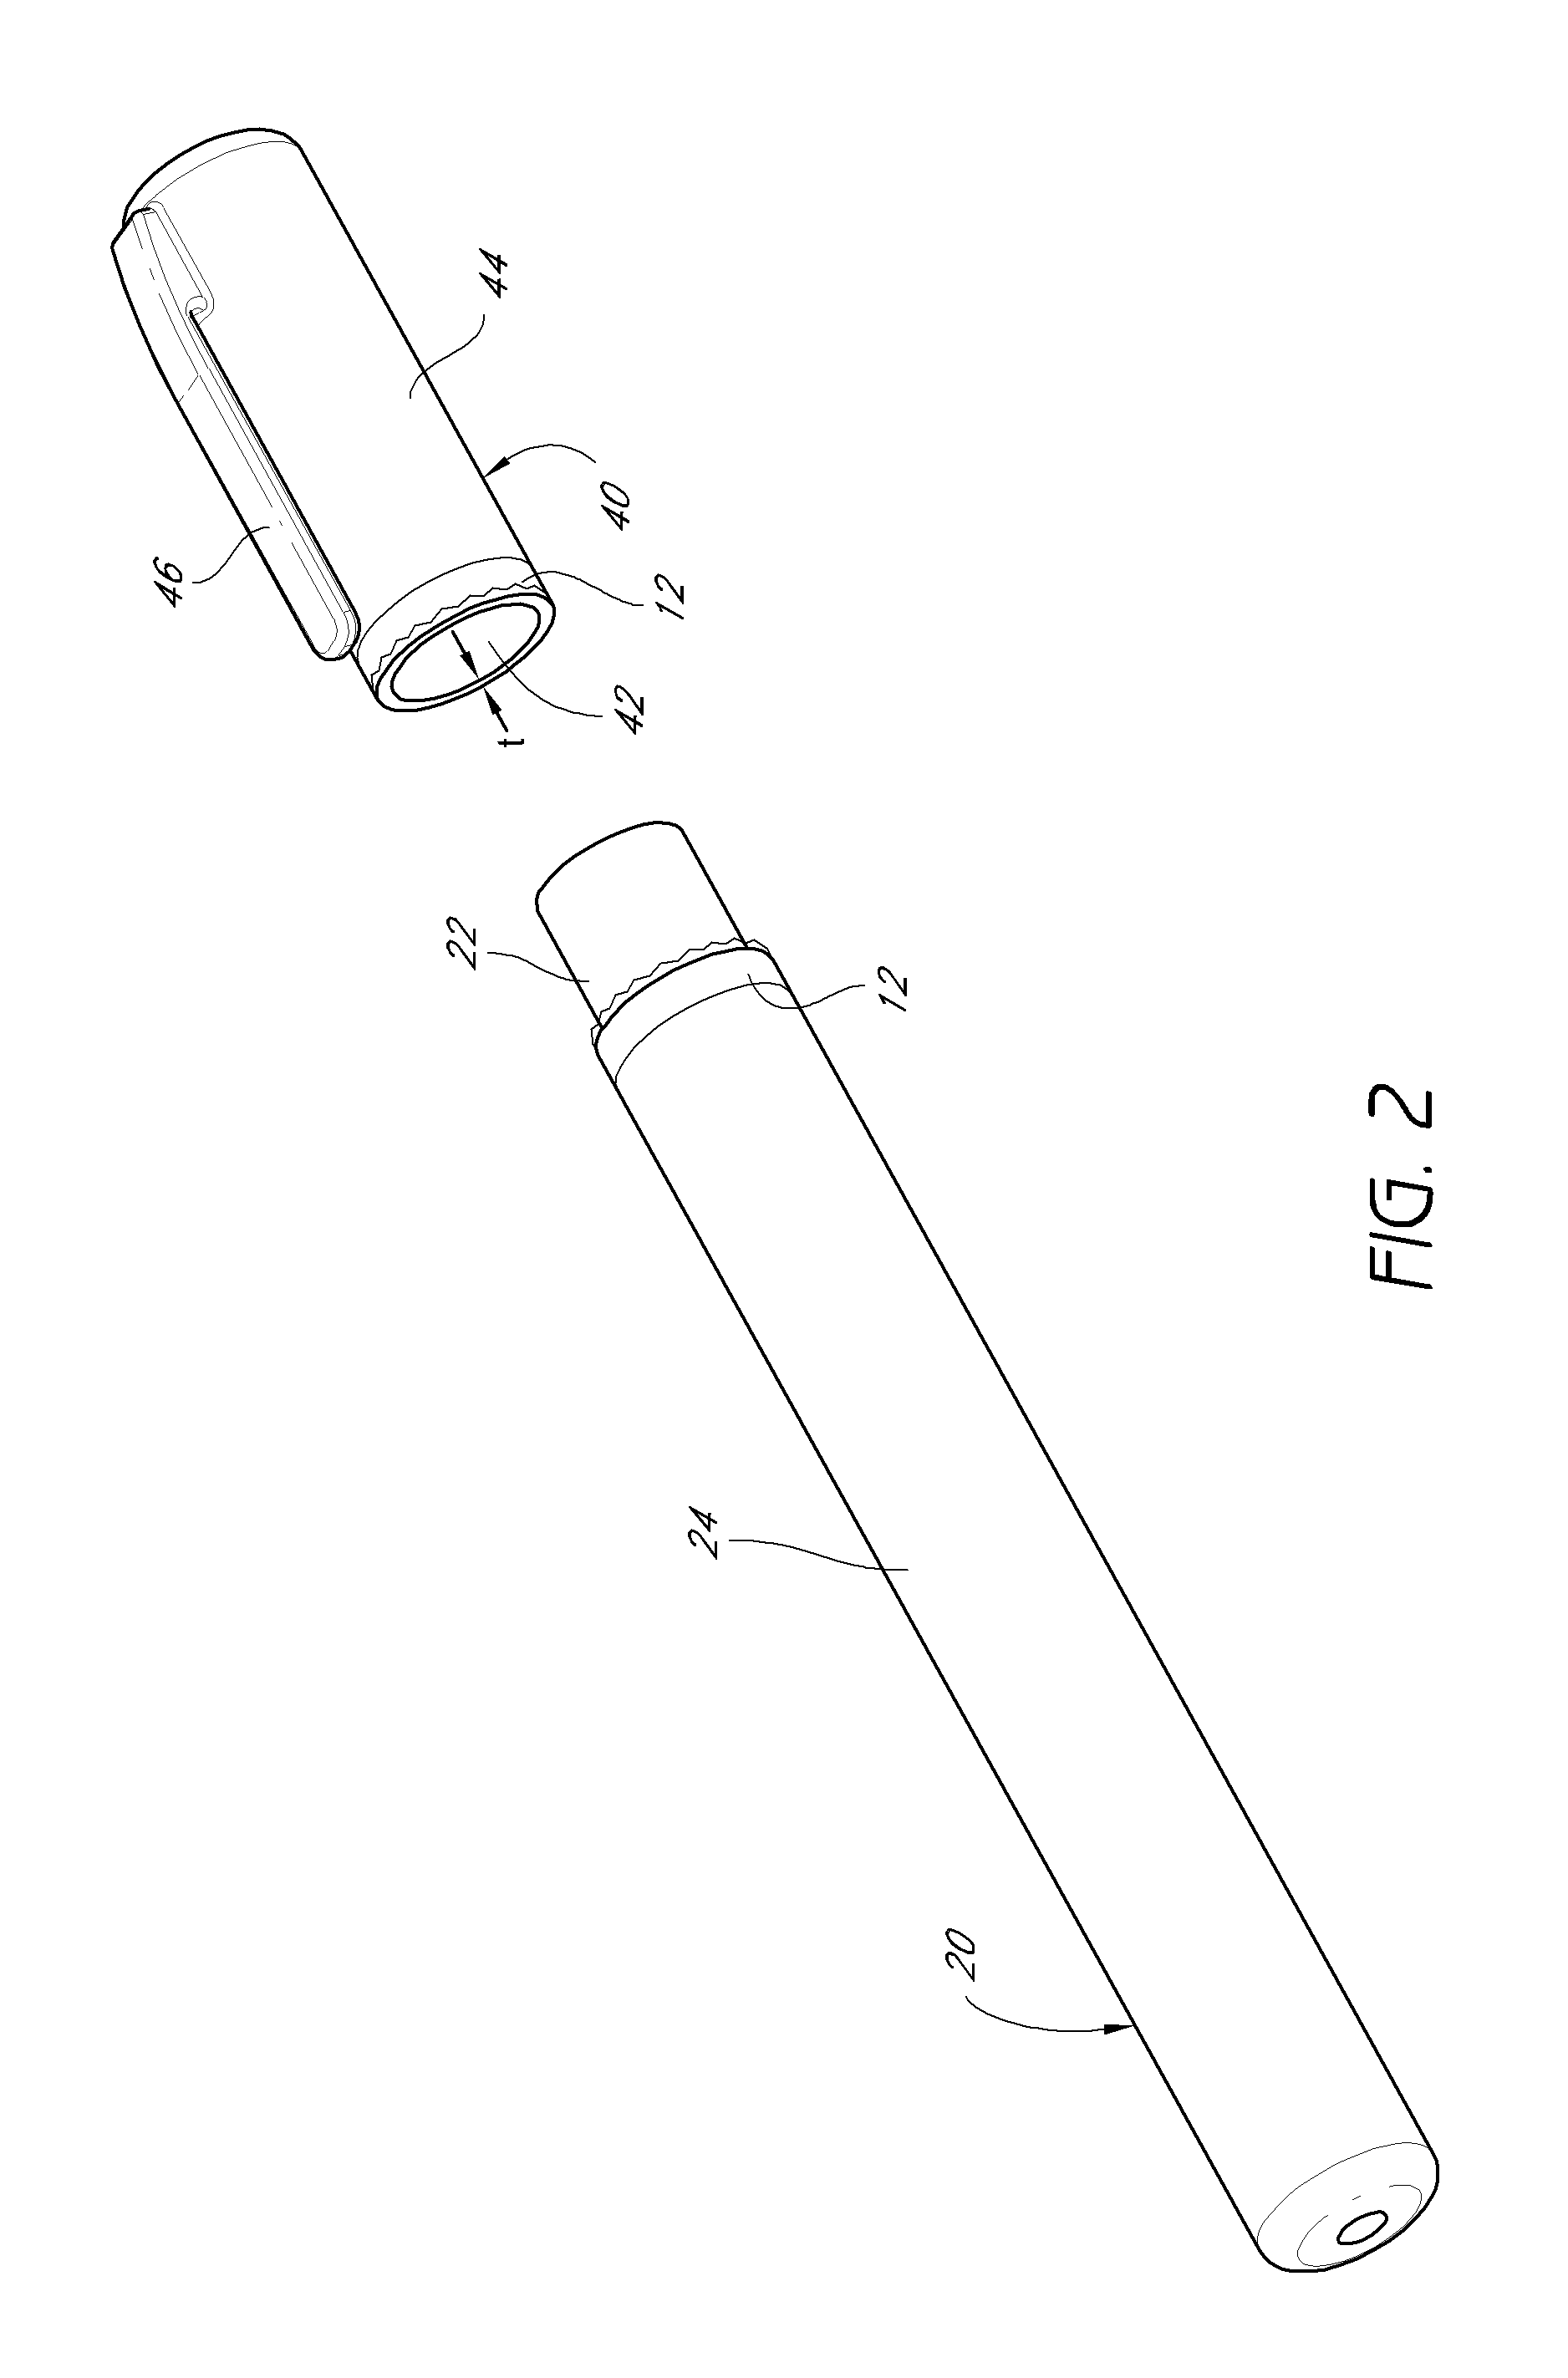 Protective containers for medical devices and methods of use